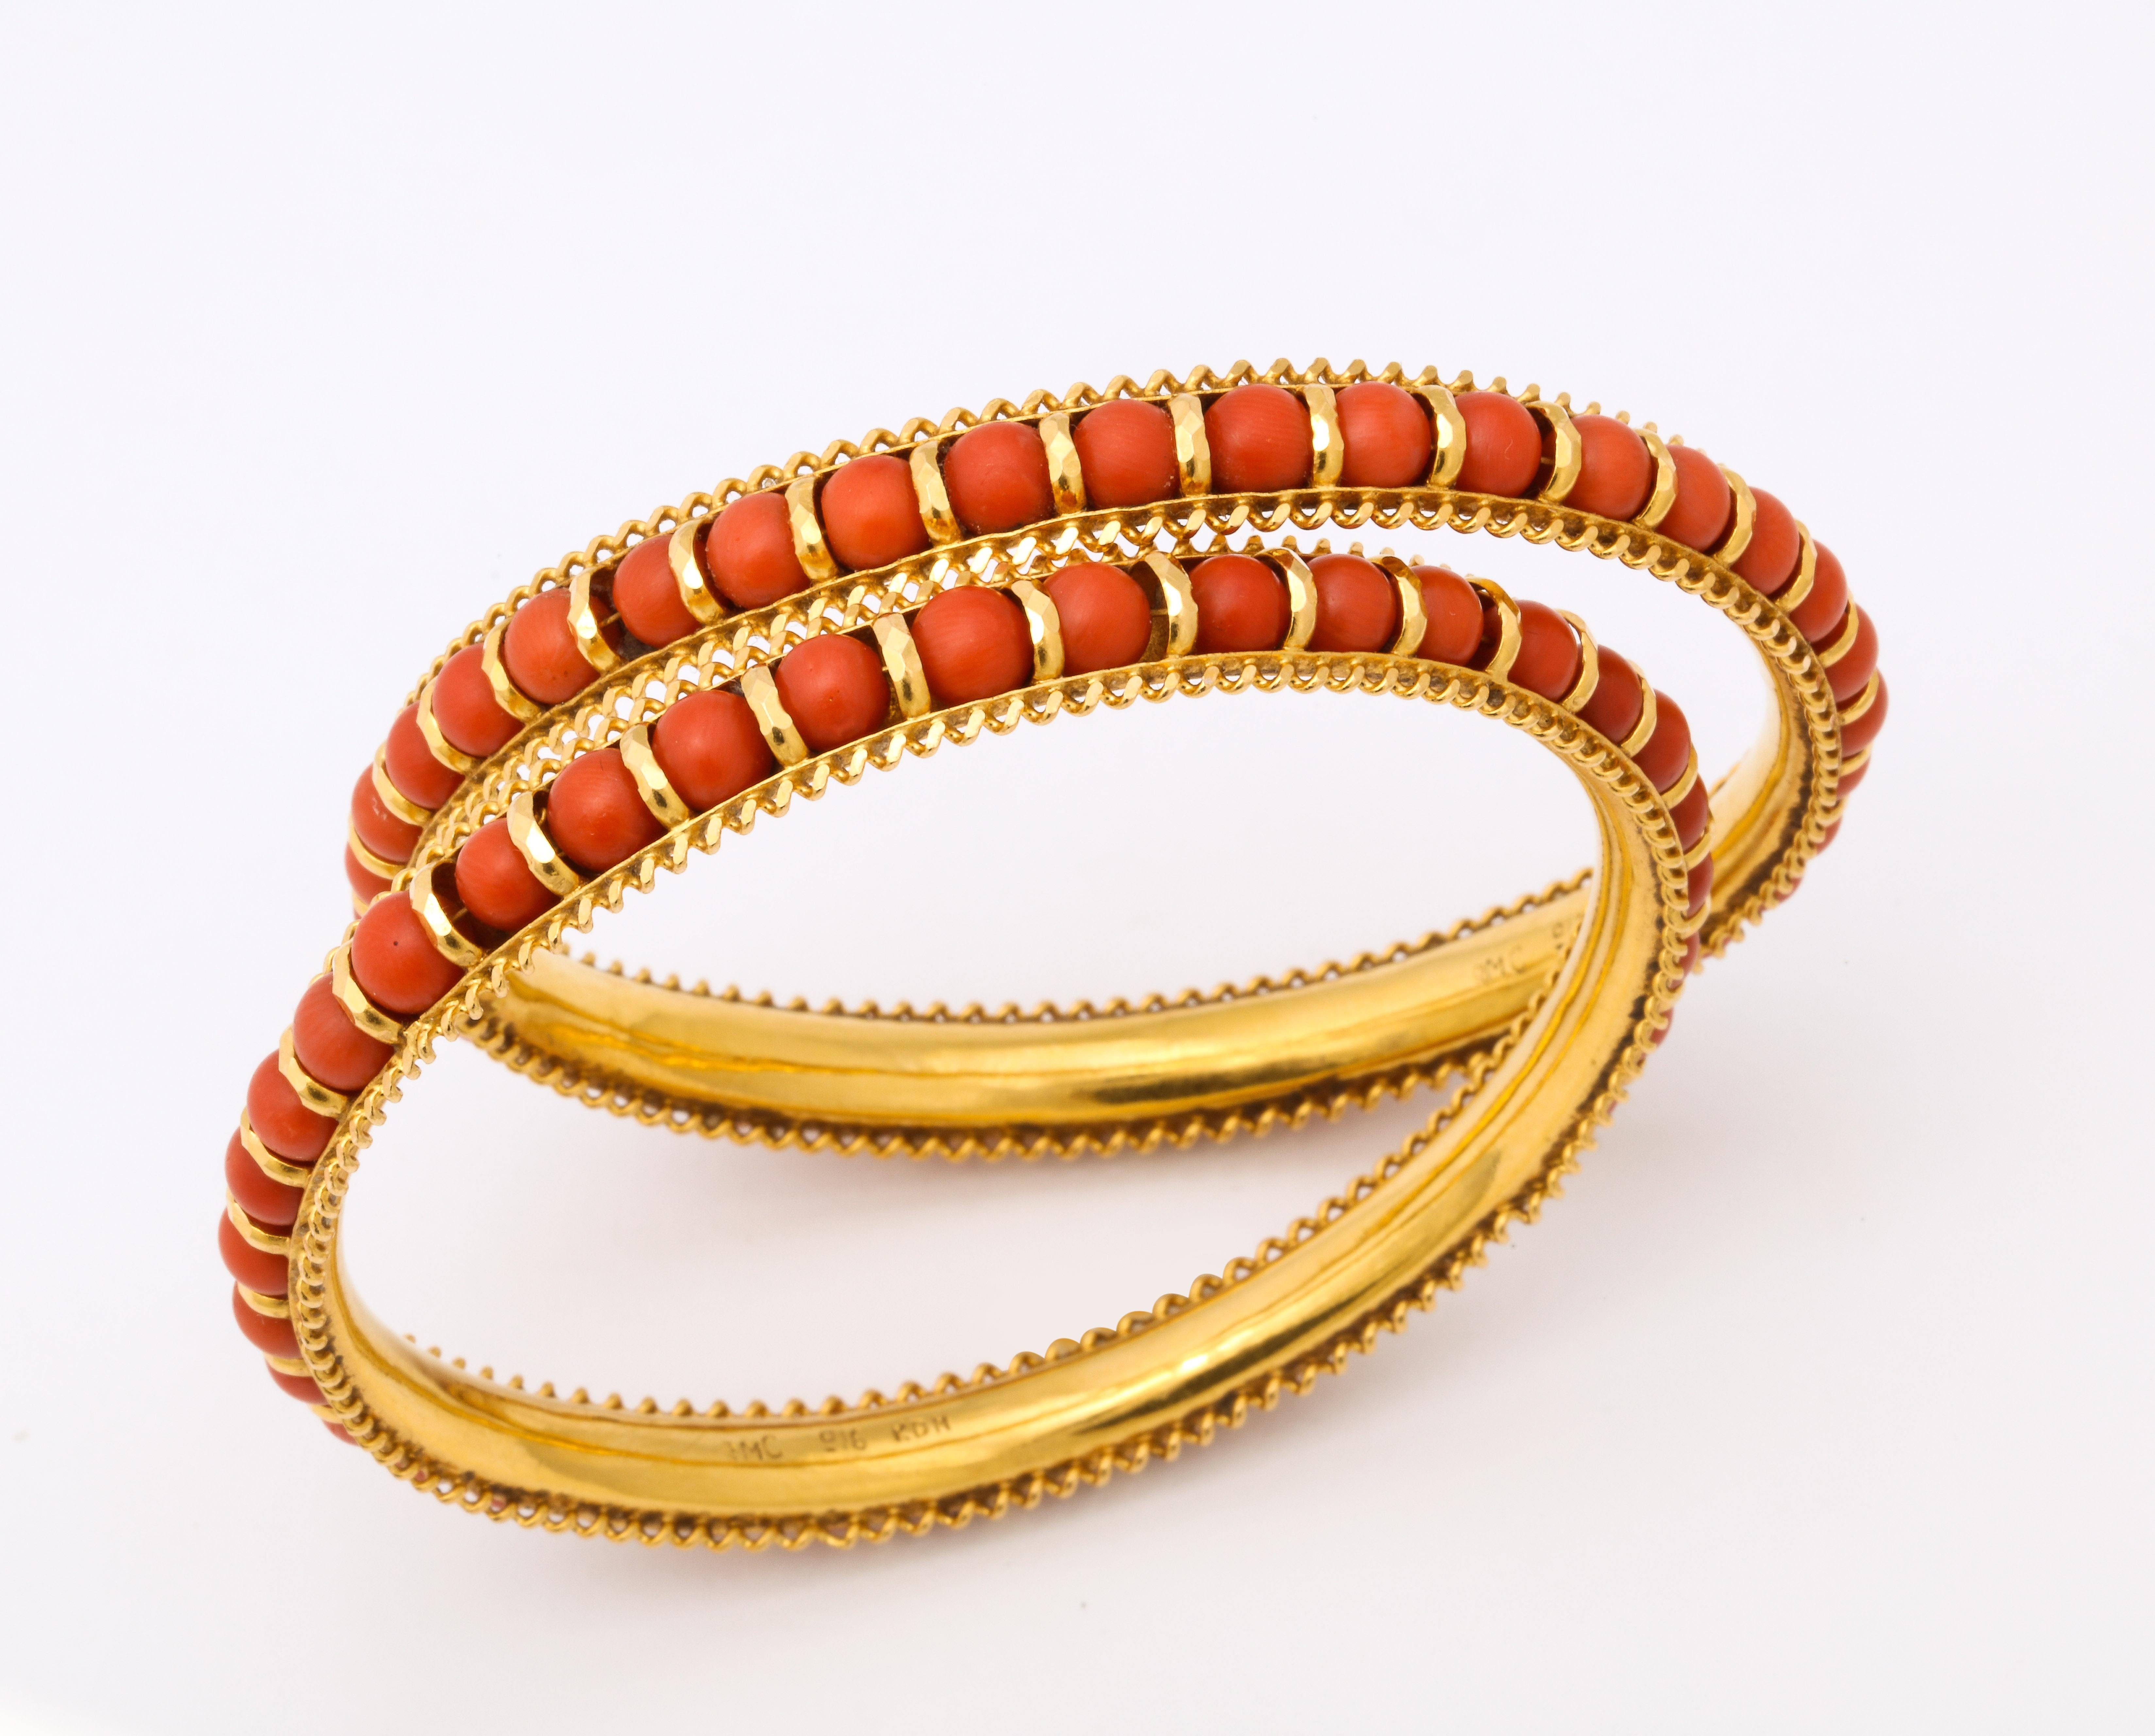 One Pair Of Ladies 22kt Gold Bangle Slip On Bracelets Embellished With Numerous Beautiful Color Coral Beads. Fits Standard Size Wrist..50 Inches Wide For Combined Bracelets.